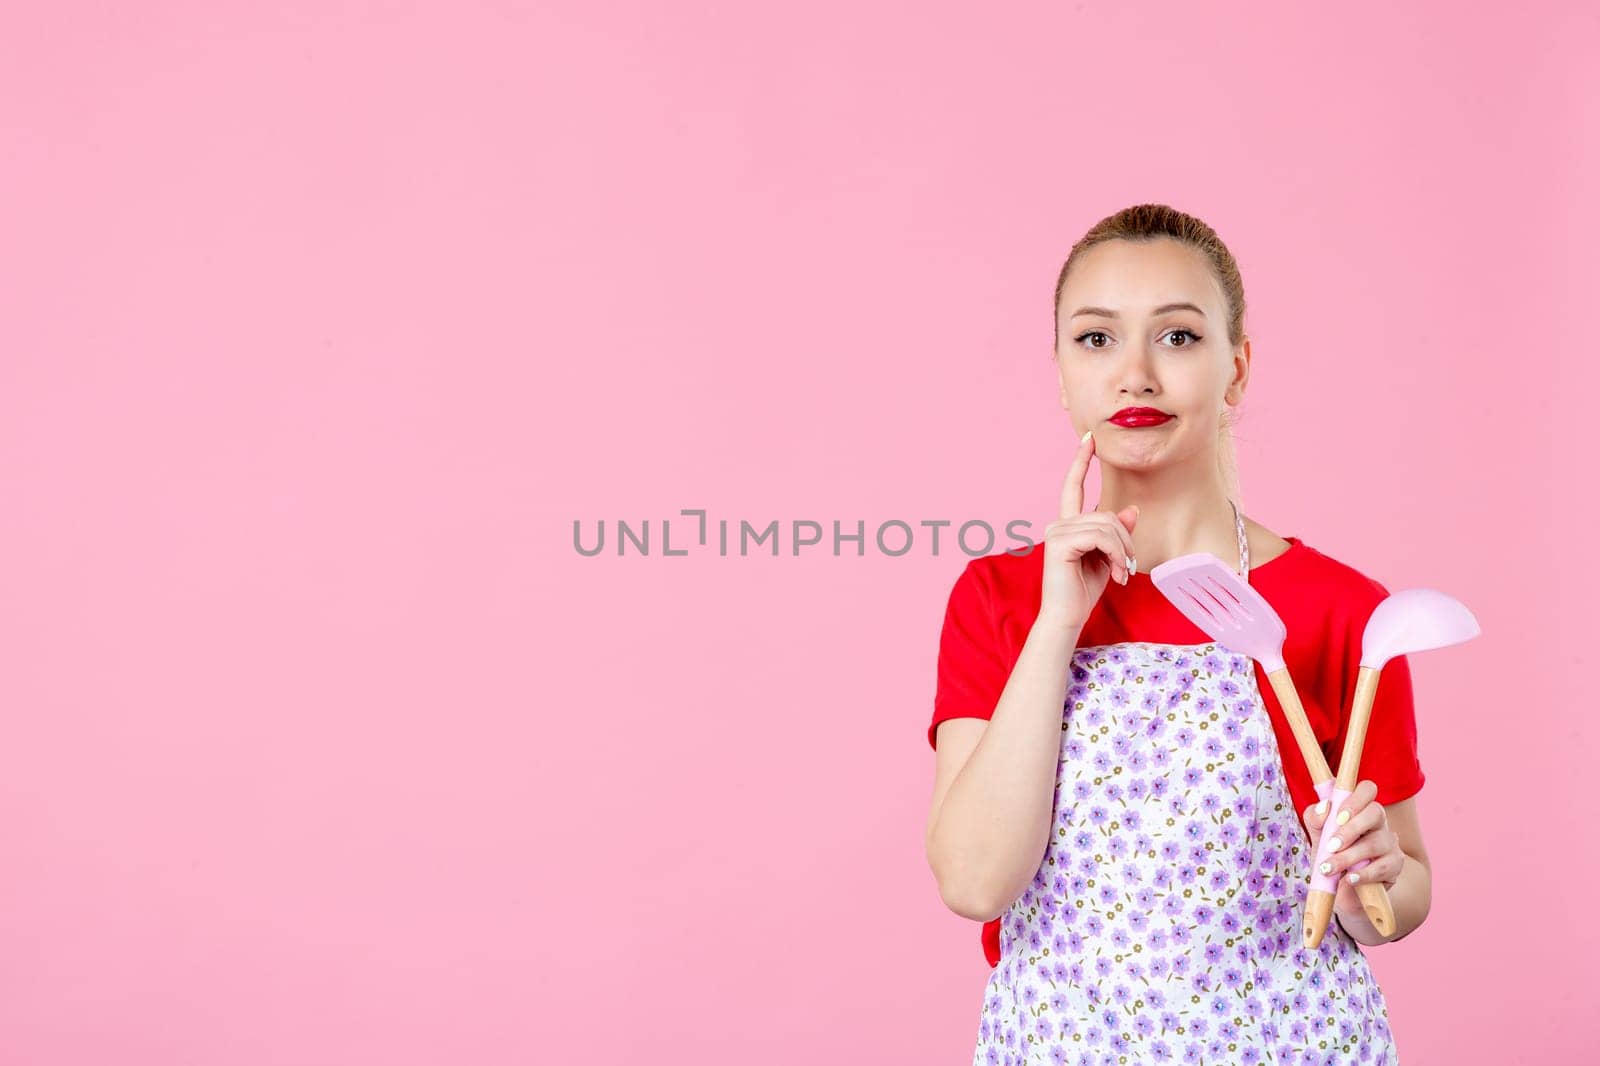 front view young housewife in cape holding spoons on pink background horizontal profession occupation duty job worker uniform cutlery